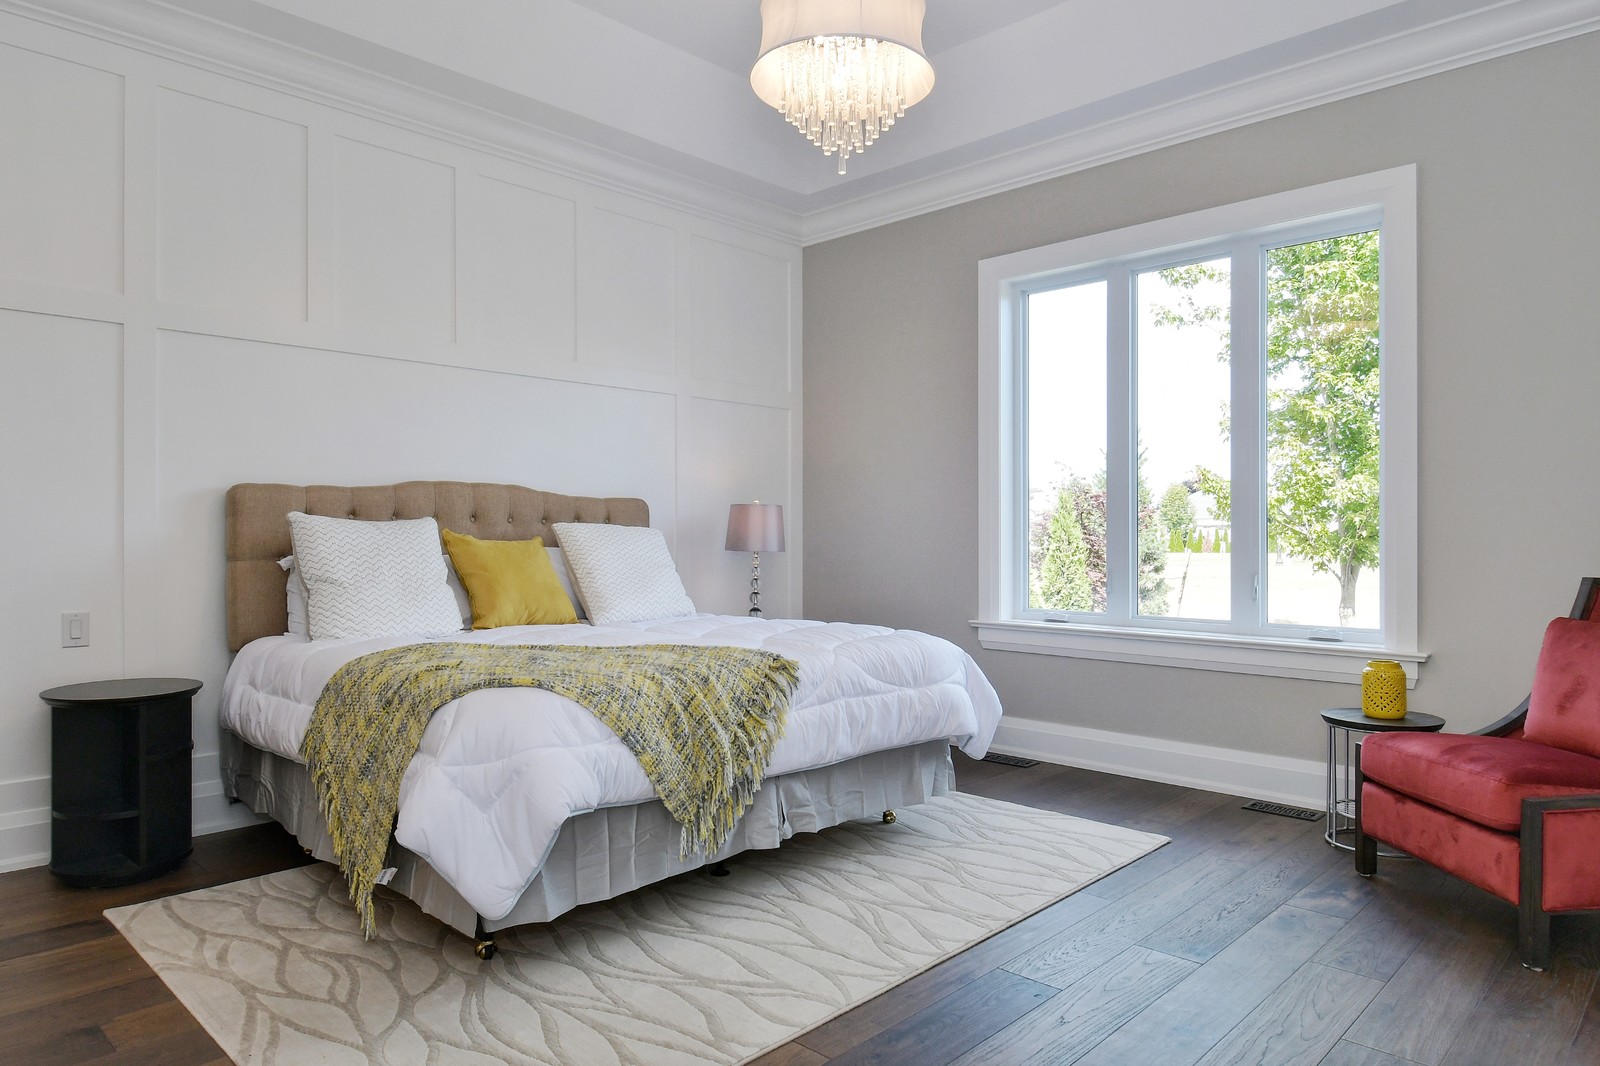 Fixed or Operable Windows, Which Should You Choose? | Golden Windows